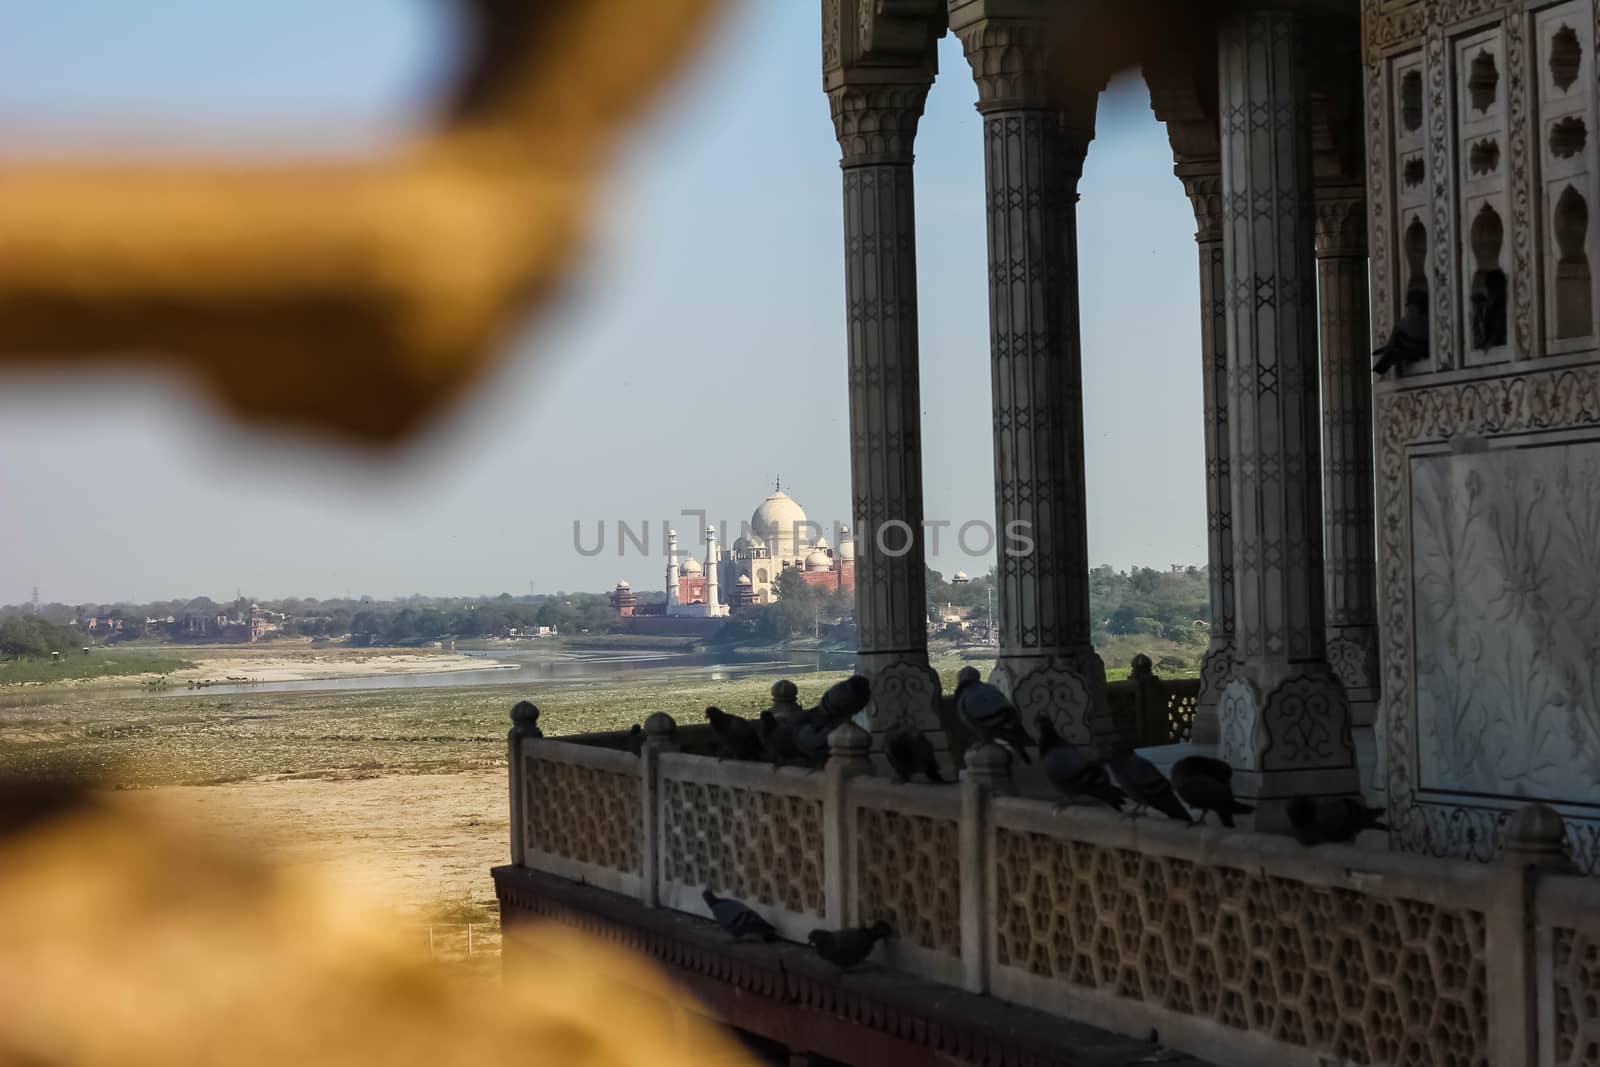 View of Taj Mahal from lattice jali in Agra, Uttar Pradesh, India. It was build by shah jahan as a memorial for his second wife Mumtaz Mahal